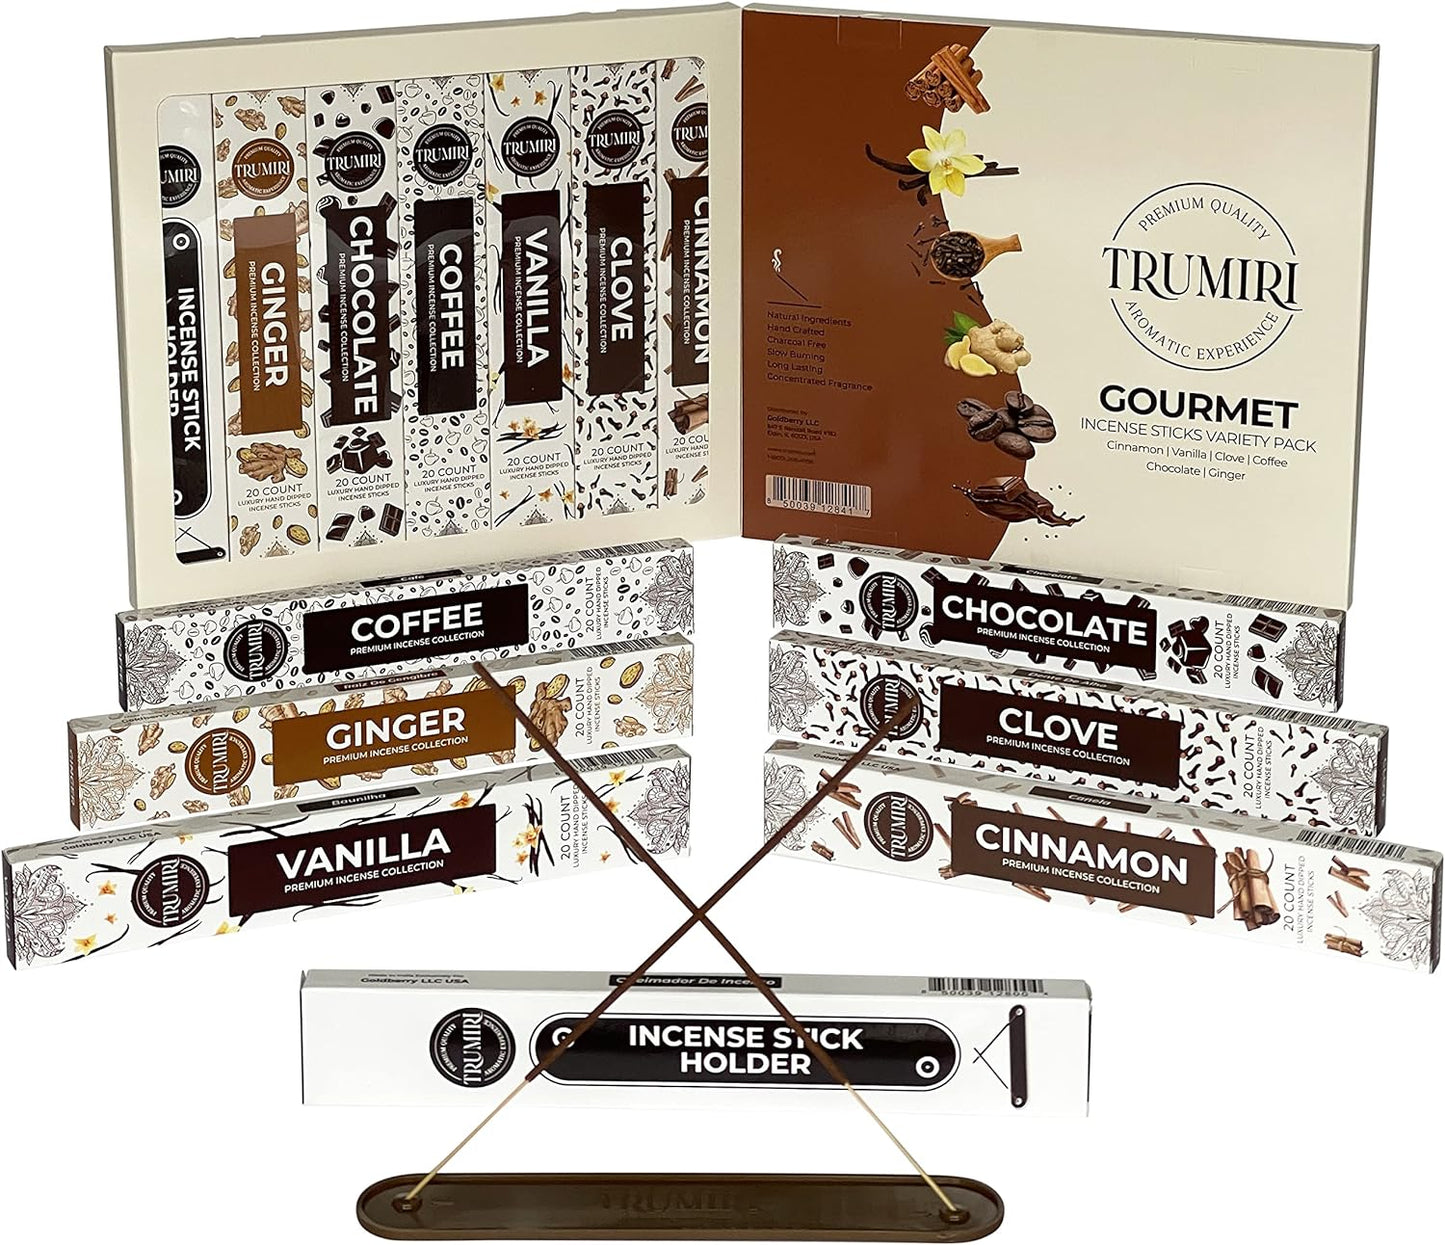 Gourmet Incense Sticks Variety Pack with Incense Holder